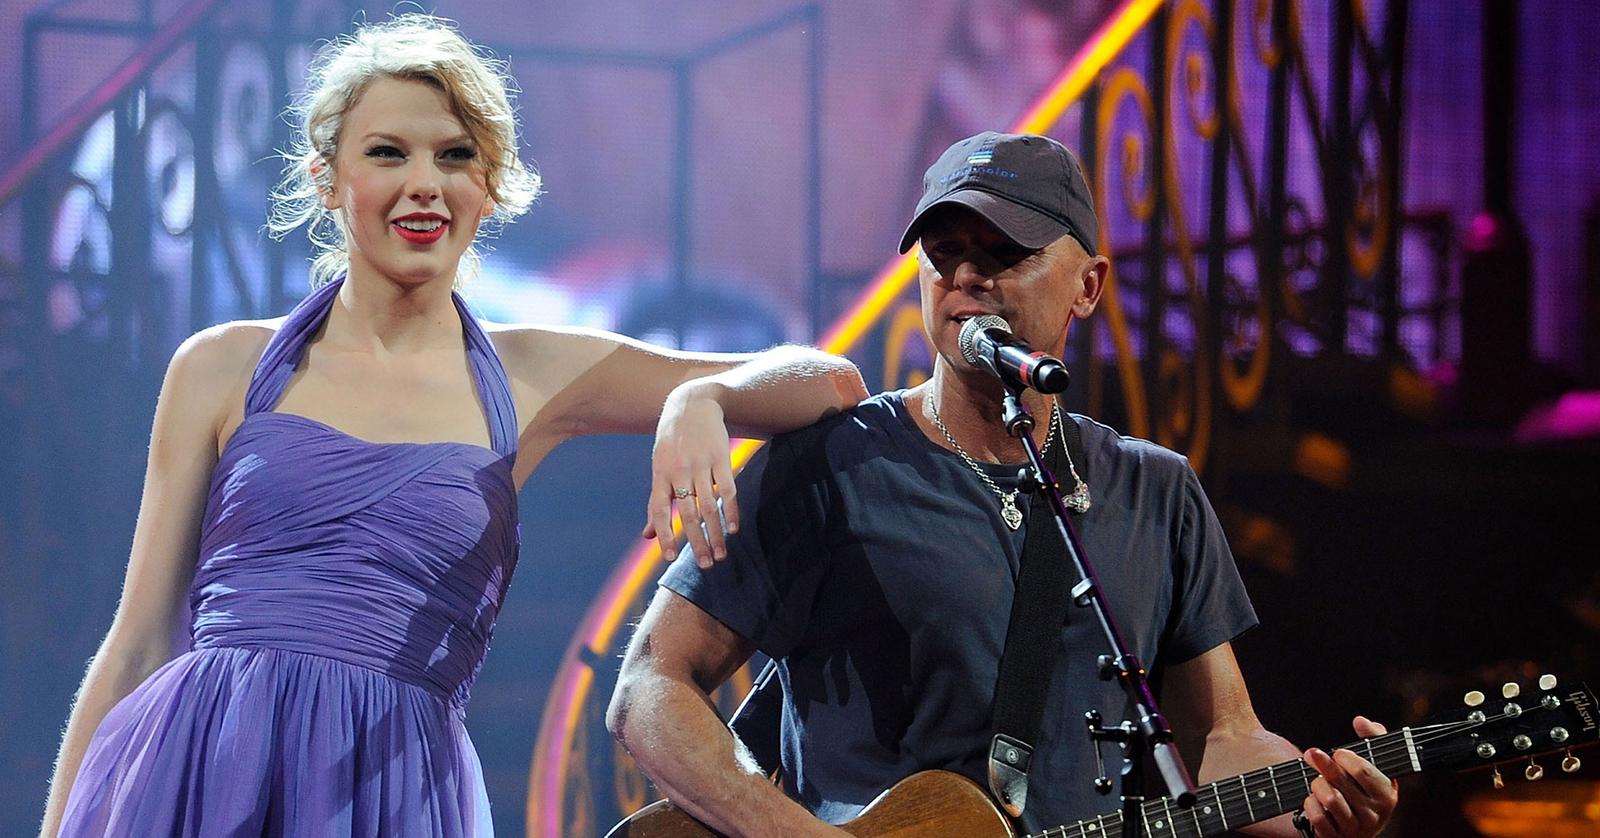 Taylor Swift Returns To Country Roots On Duet With Kenny Chesney